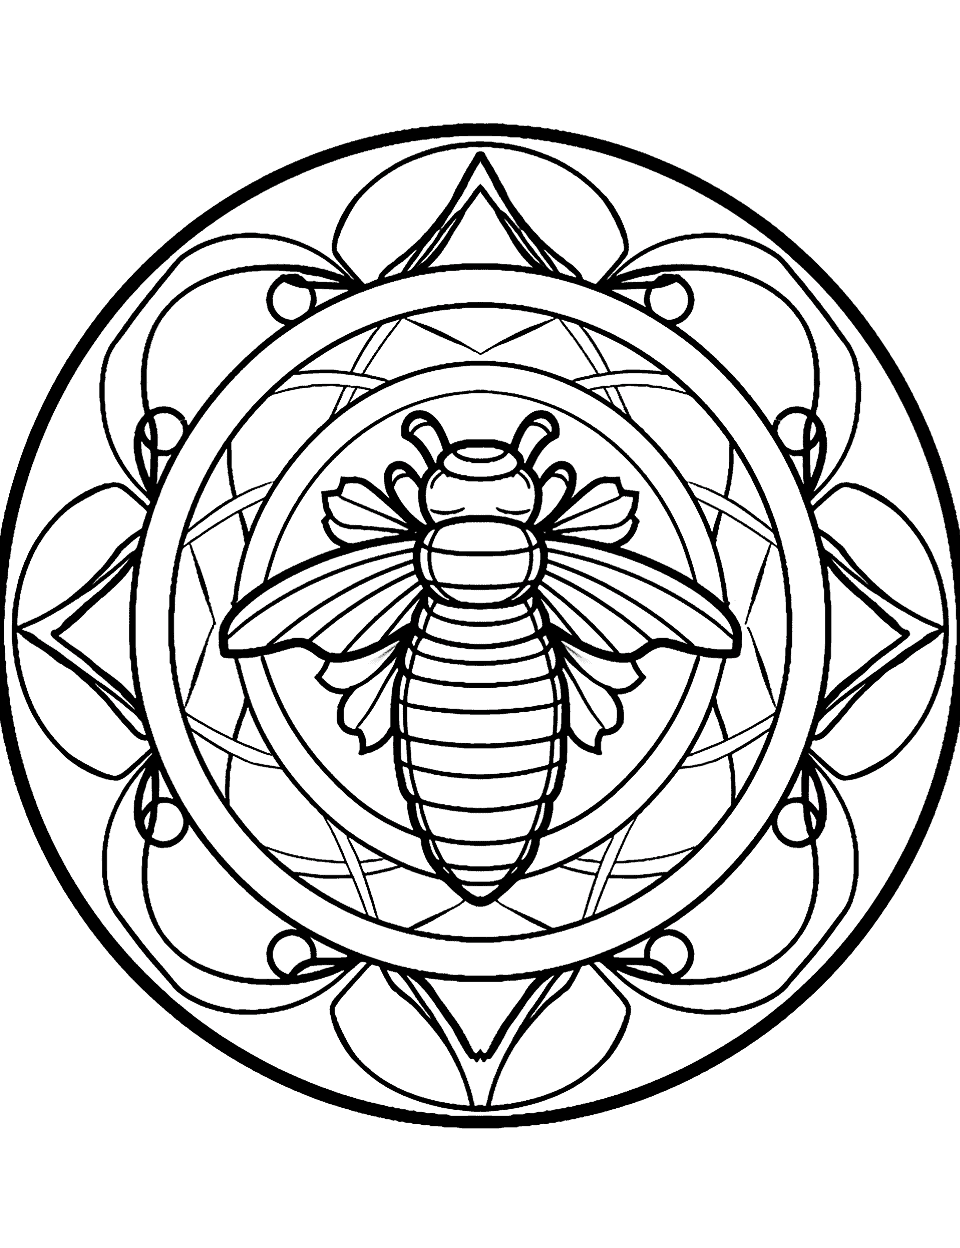 Easy Bumblebee Mandala Coloring Page - An approachable mandala design with a cute bumblebee at the center, surrounded by circular patterns of honeycombs and flowers.